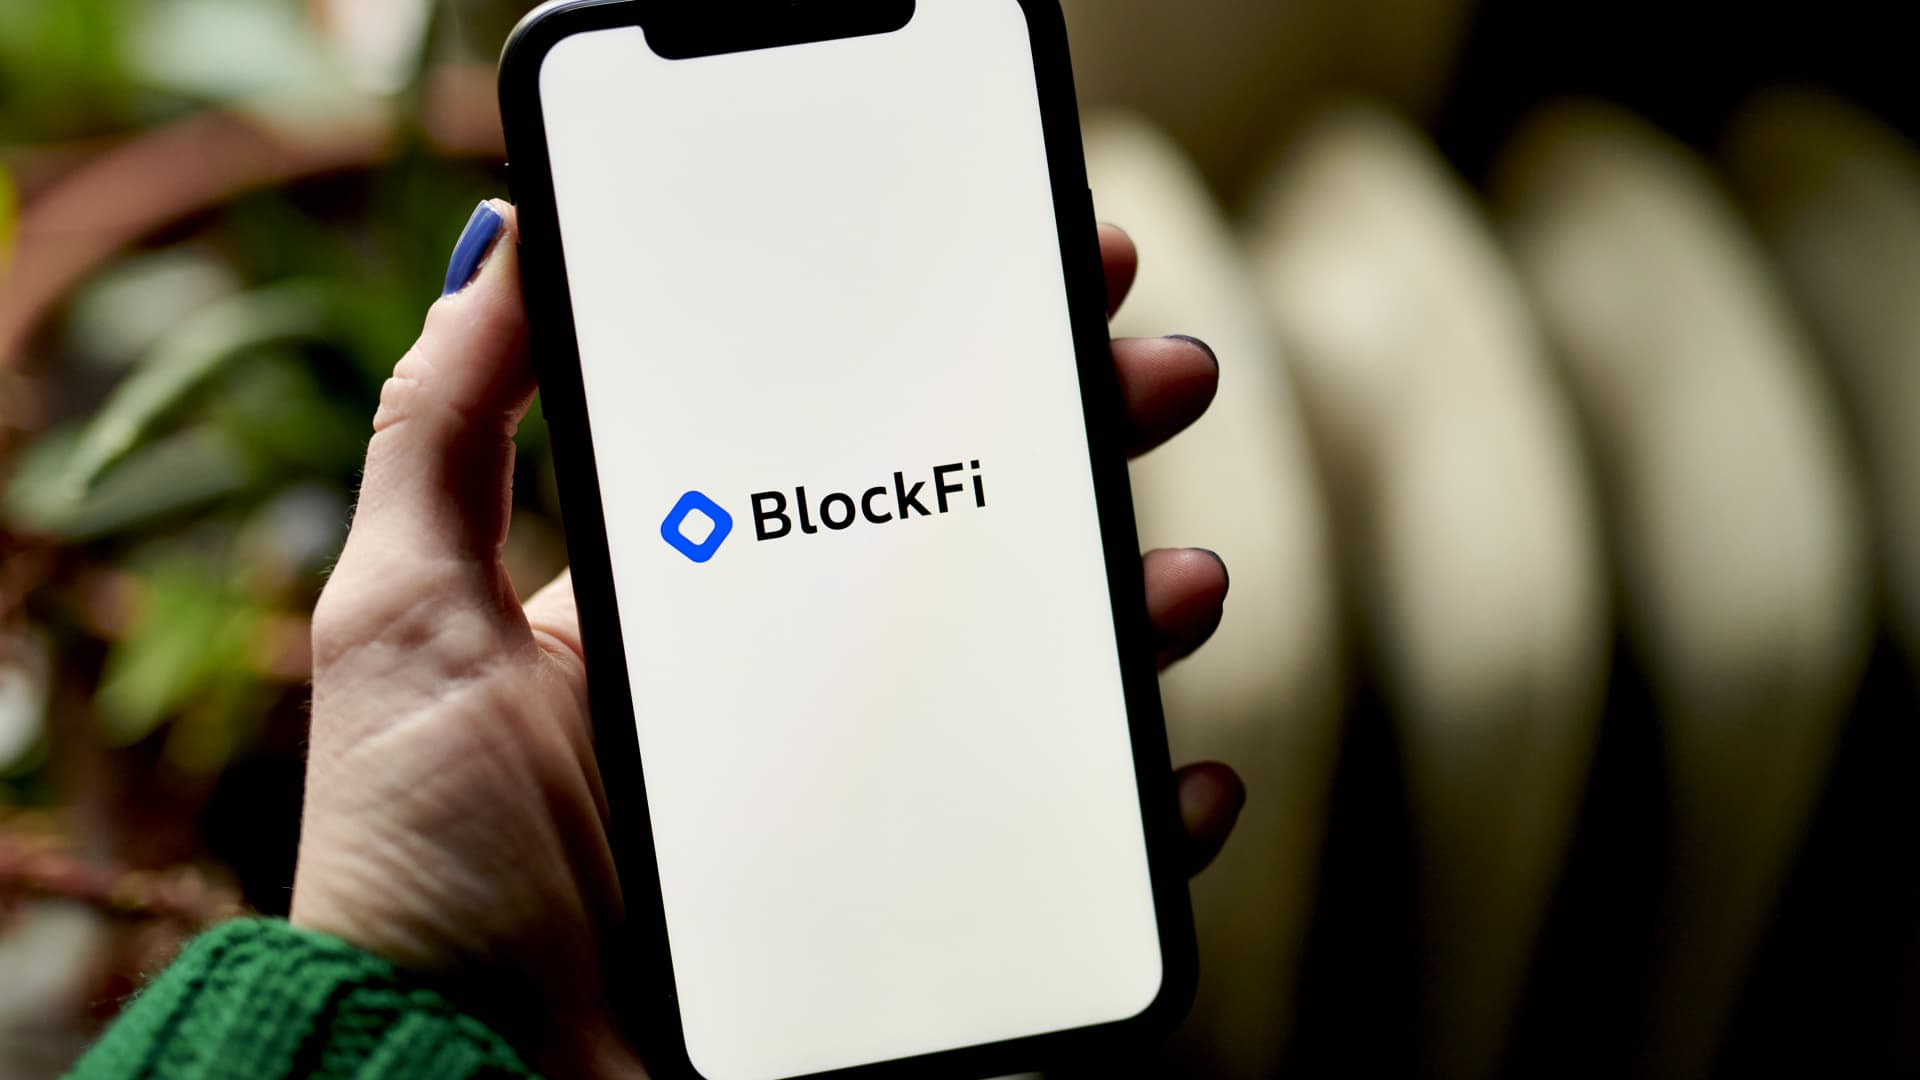 How FTX ‘death spiral’ spelled doom for BlockFi, according to bankruptcy filing